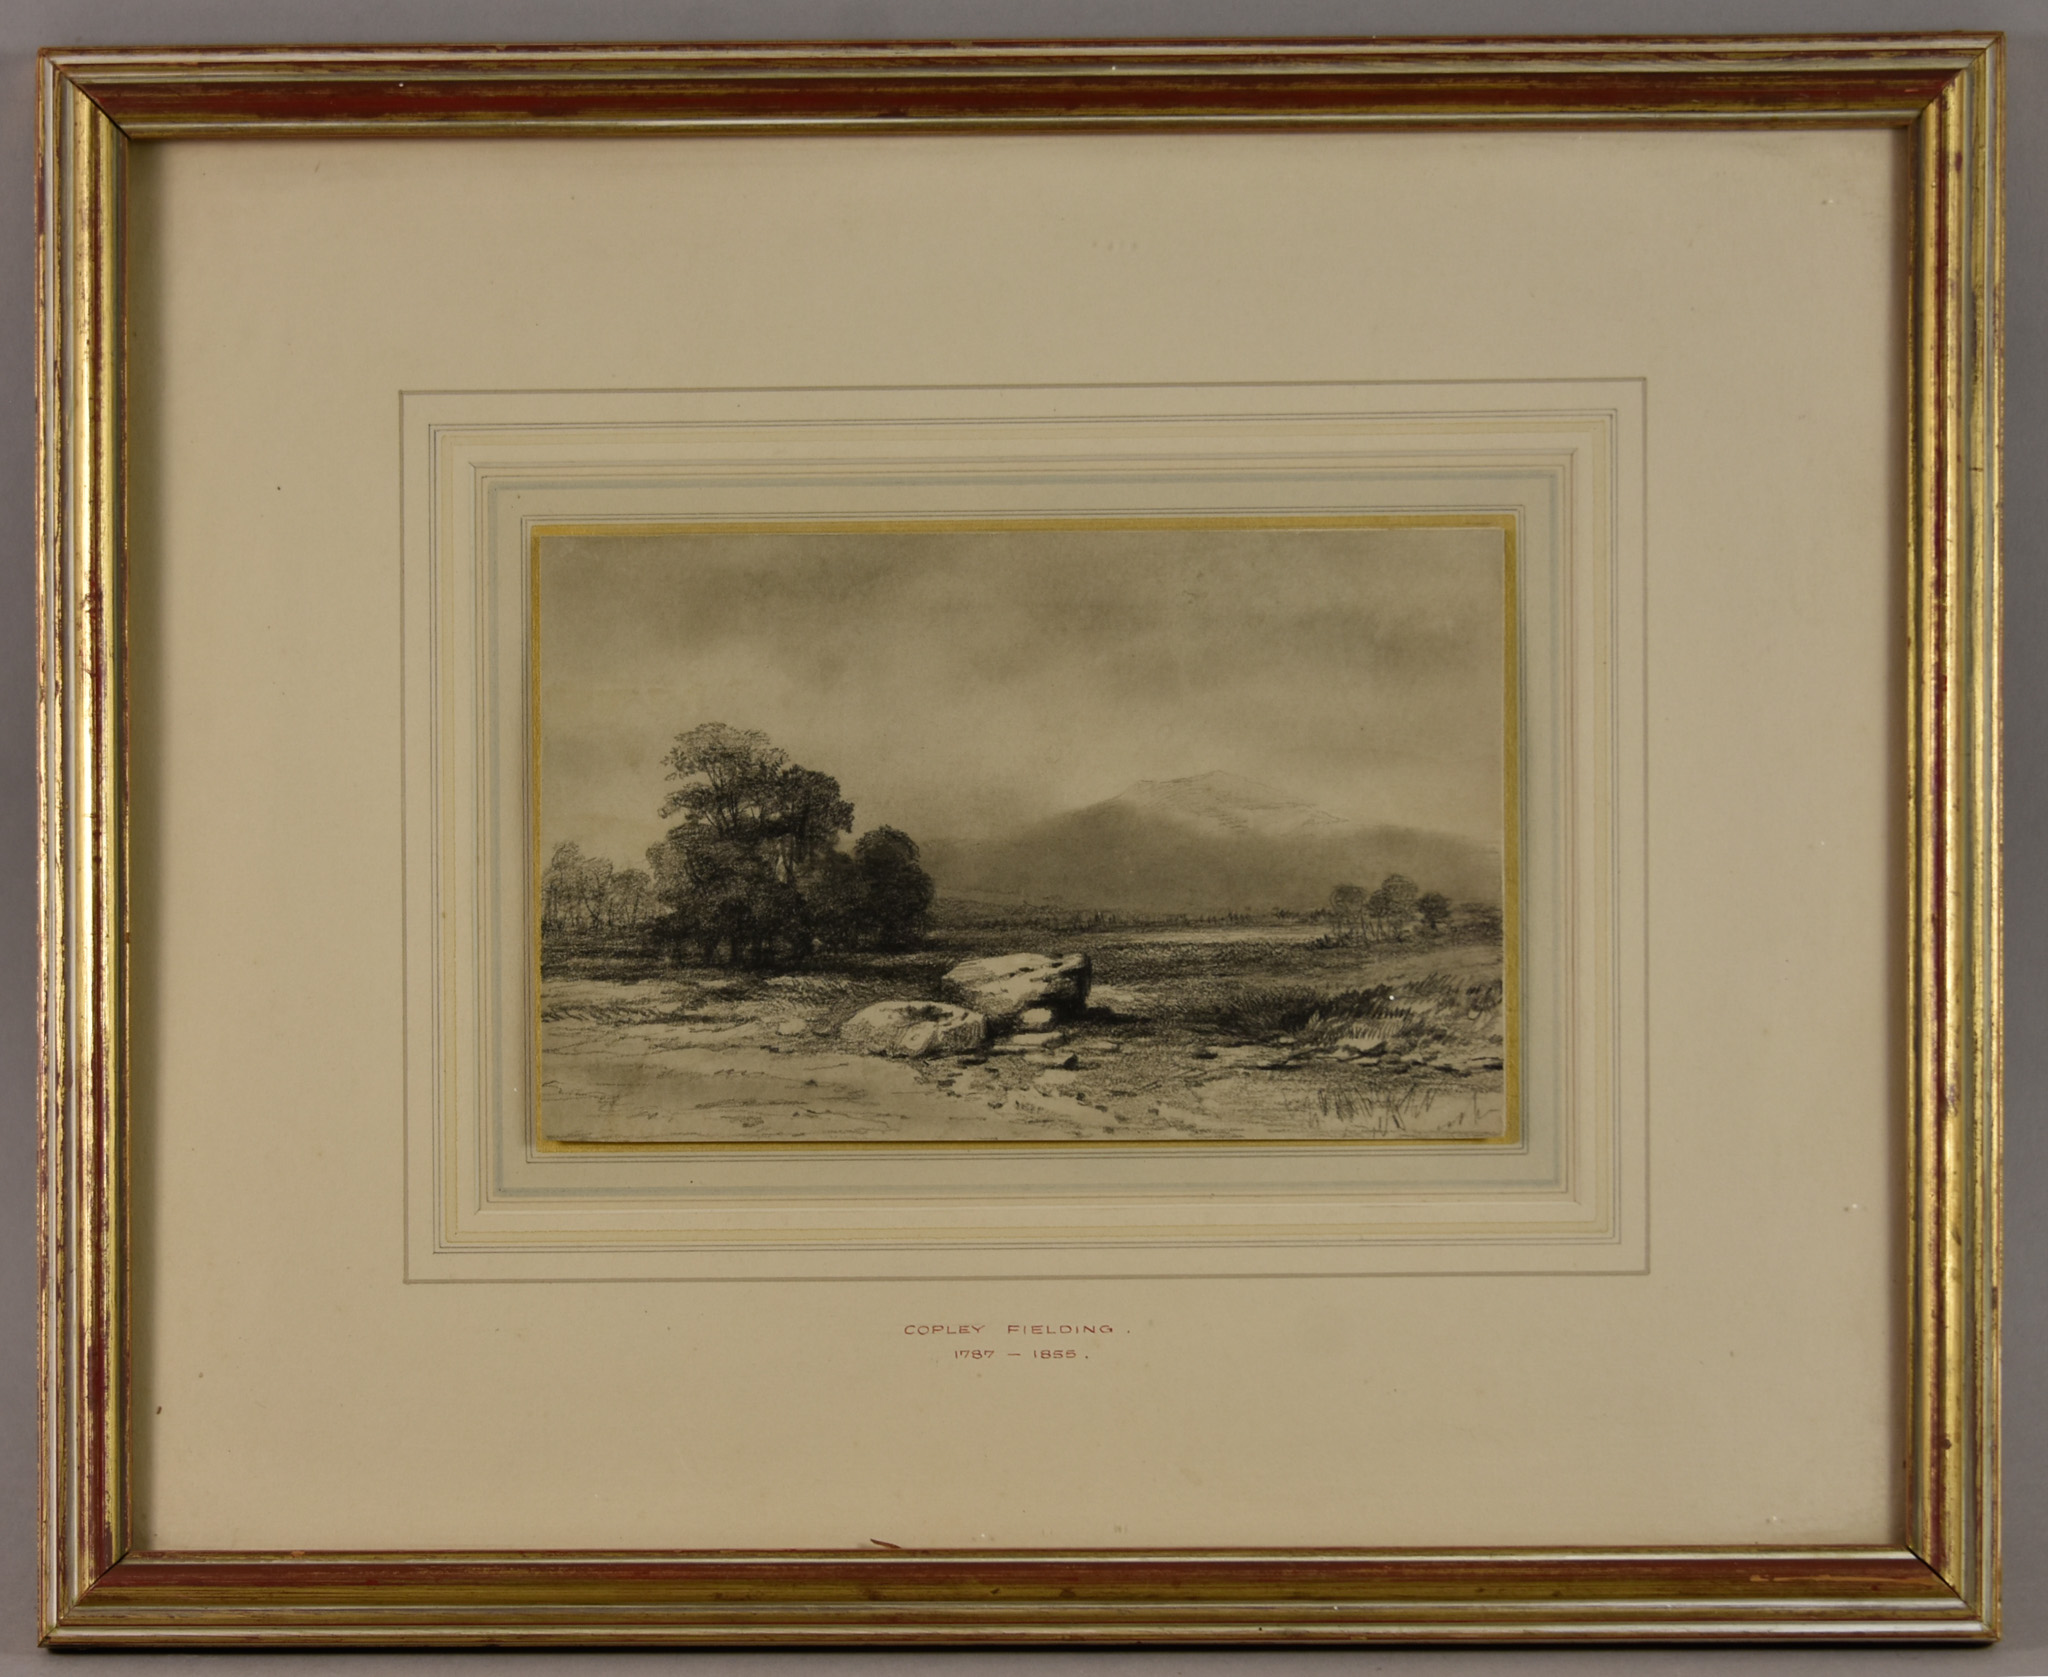 Joshua Cristall (c. 1767-1847) - Watercolour – “The Rainbow”, 4.5ins x 5.75ins, framed and glazed - Image 3 of 6